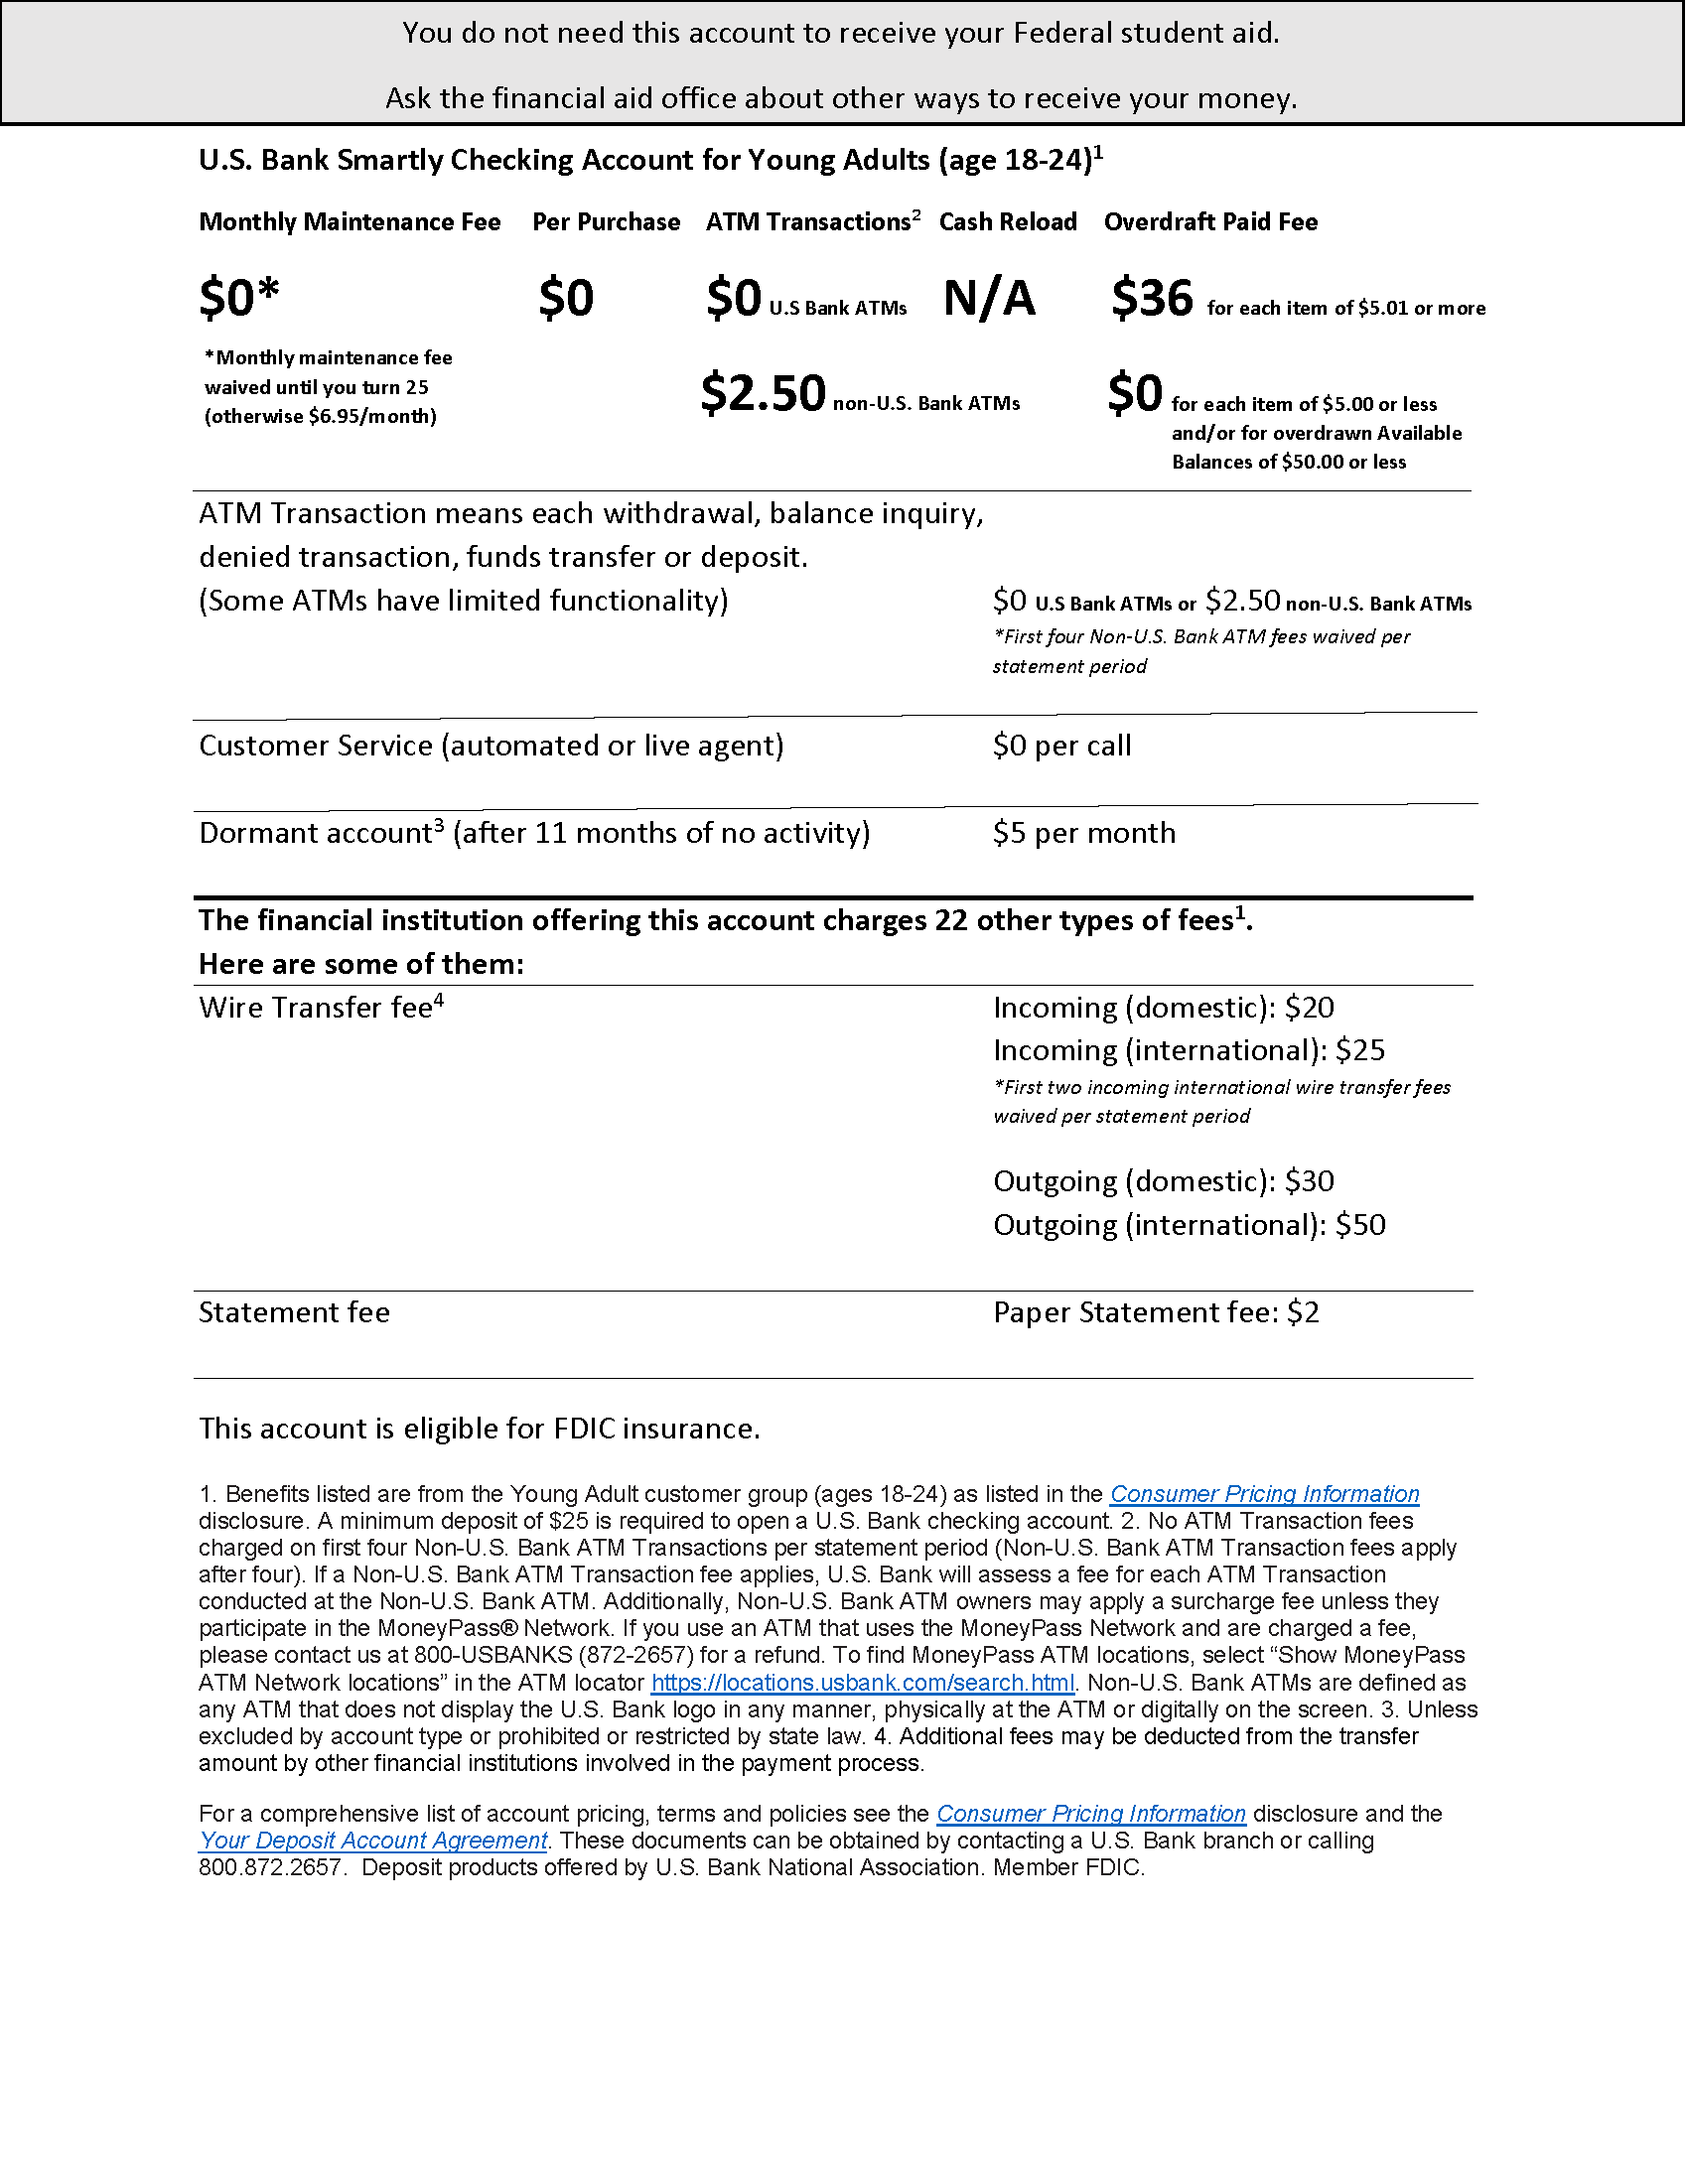 Click the image to download a PDF version of the Department of Education Disclosure form.